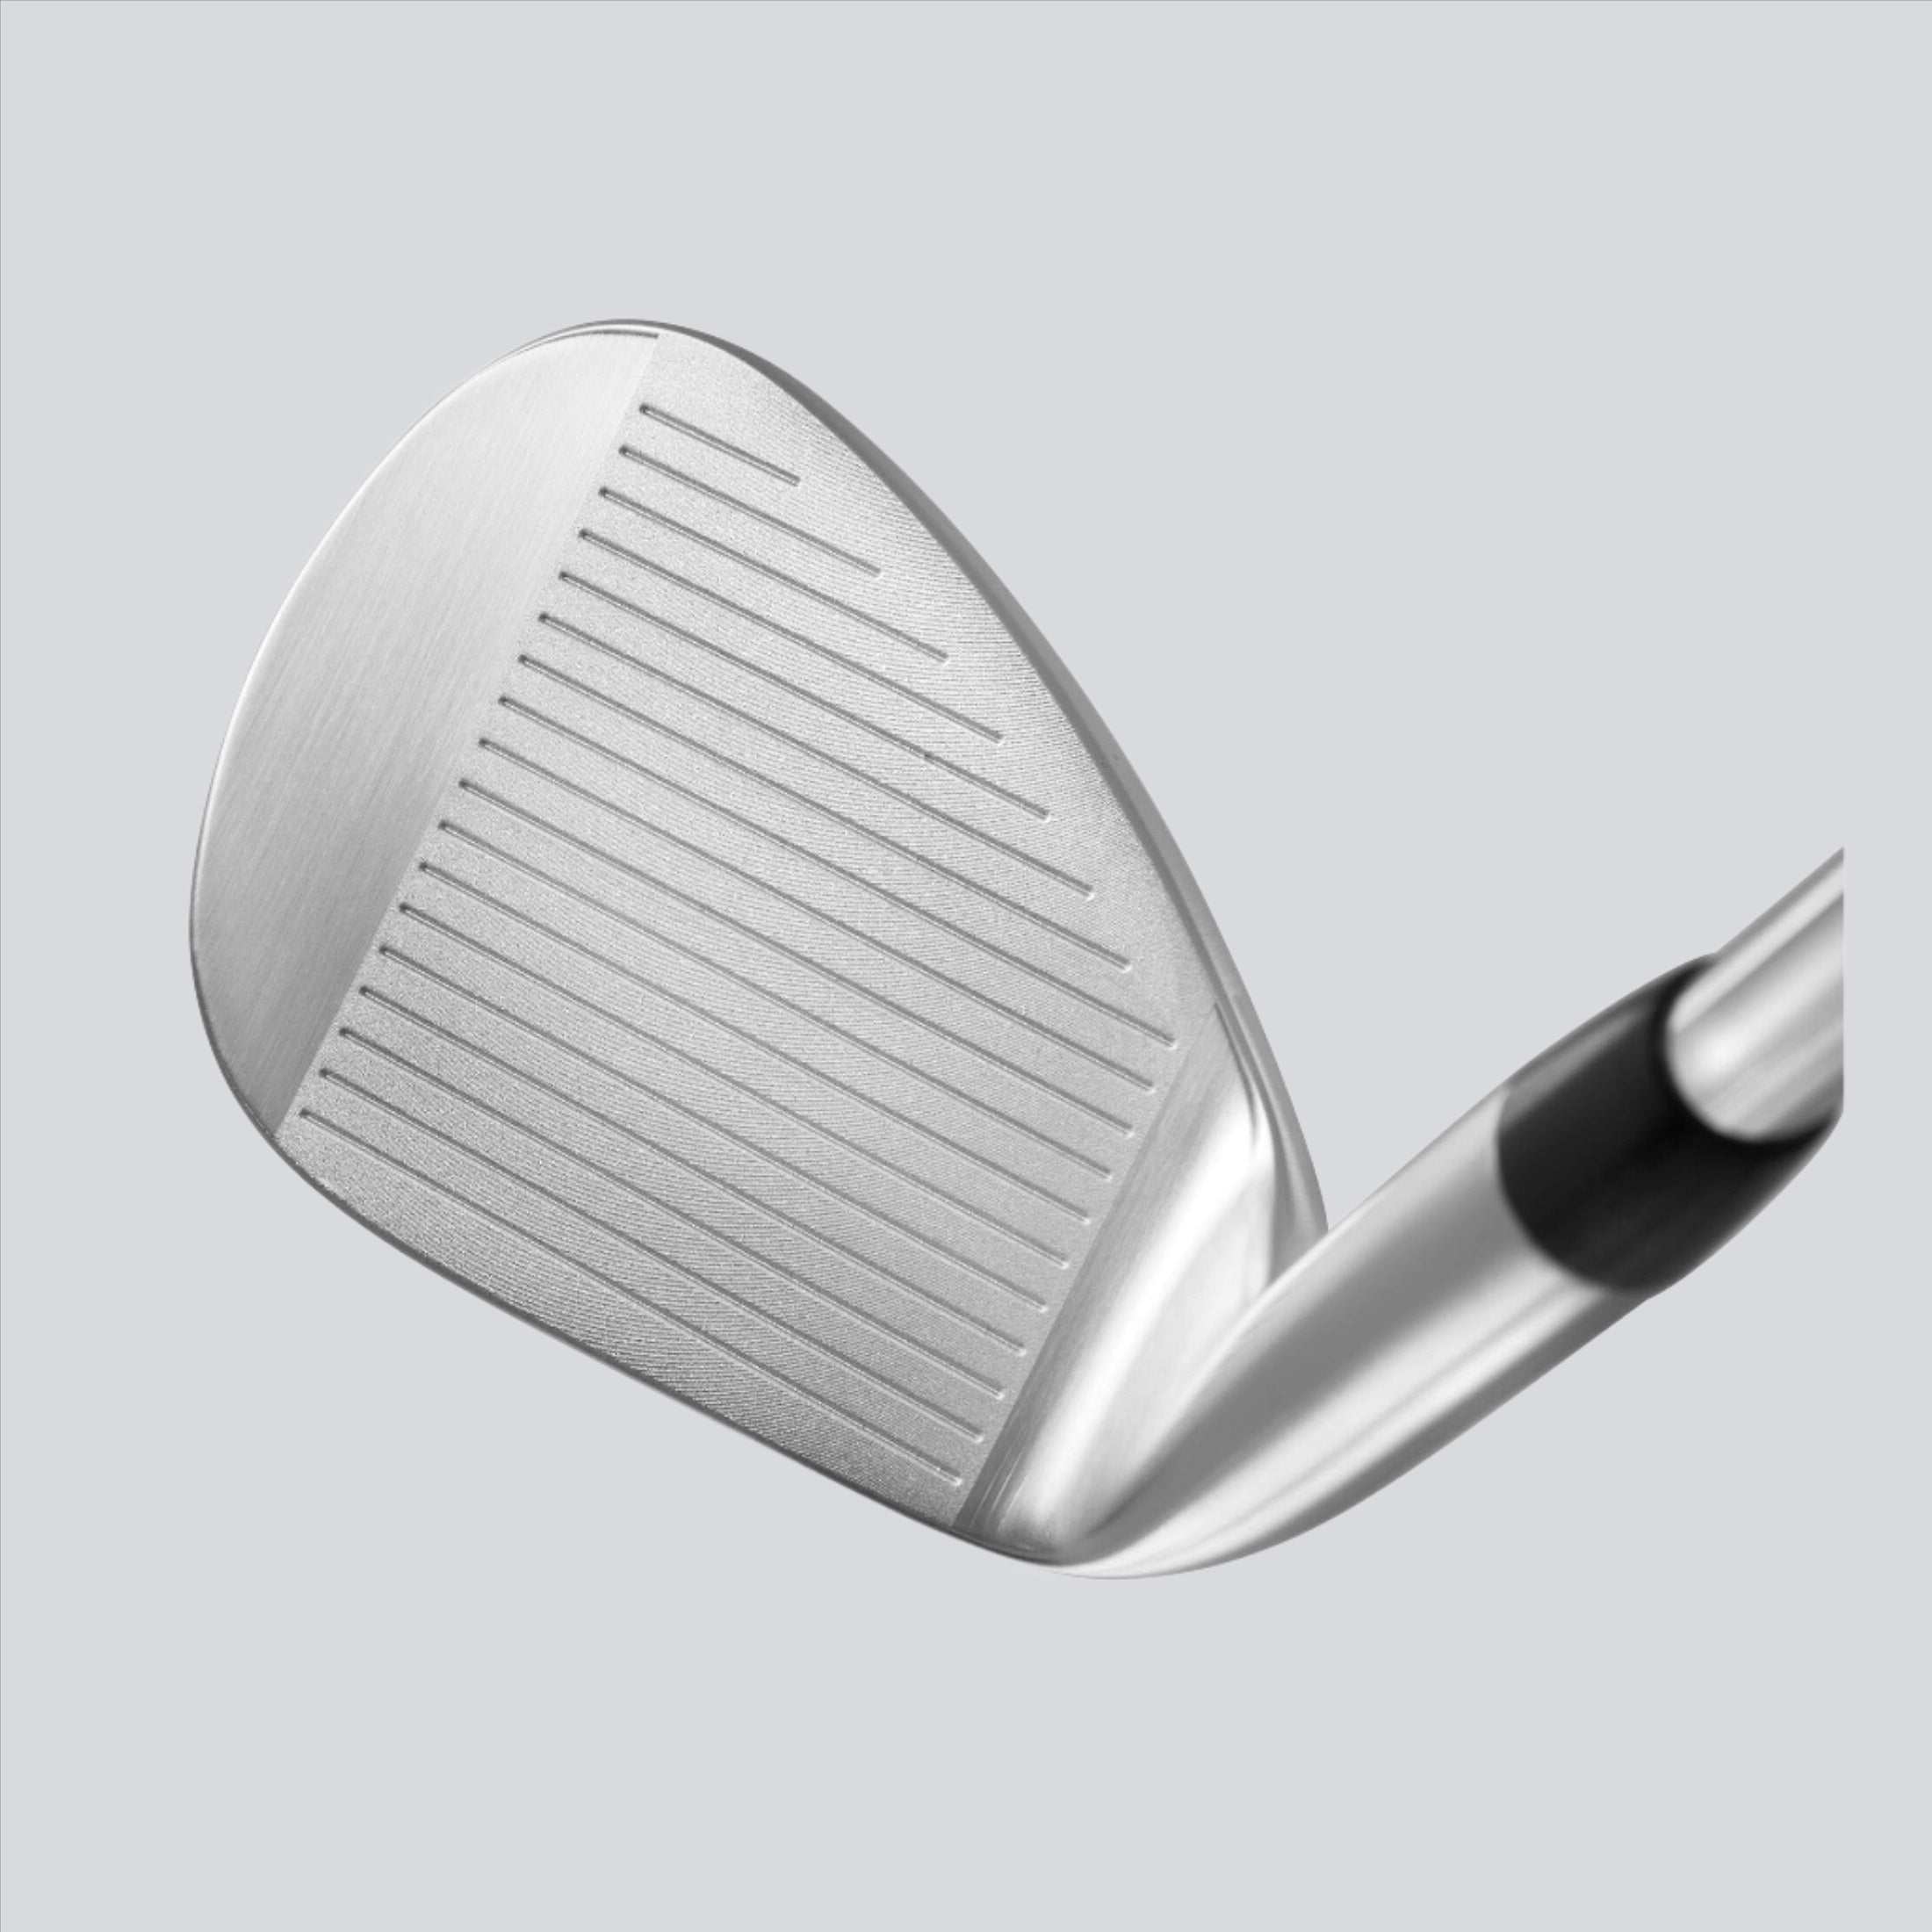 56 Degree Forged Wedge